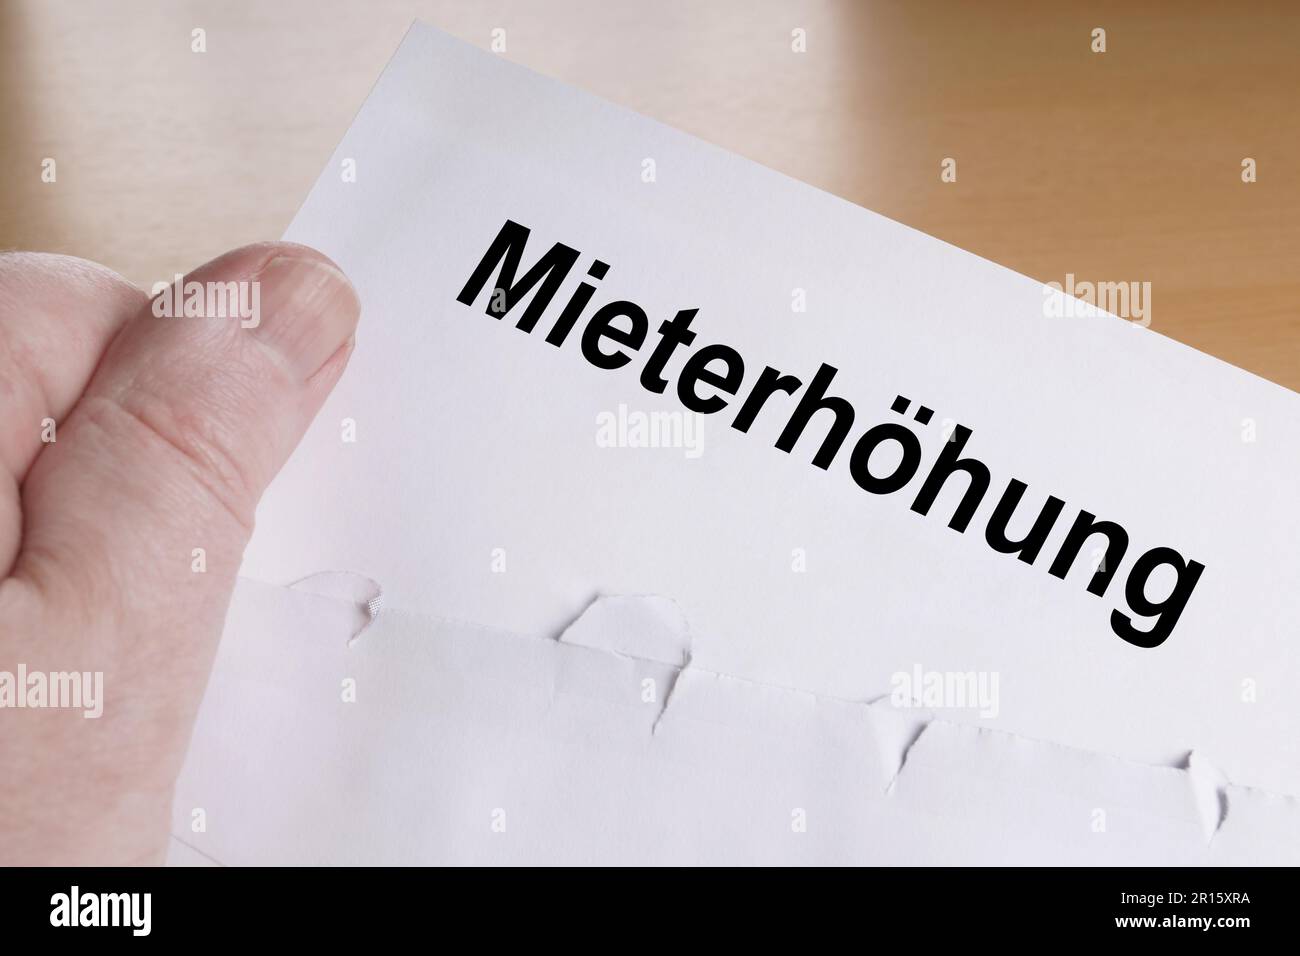 Mieterhoehung is German for rent increase, hand holding letter Stock Photo